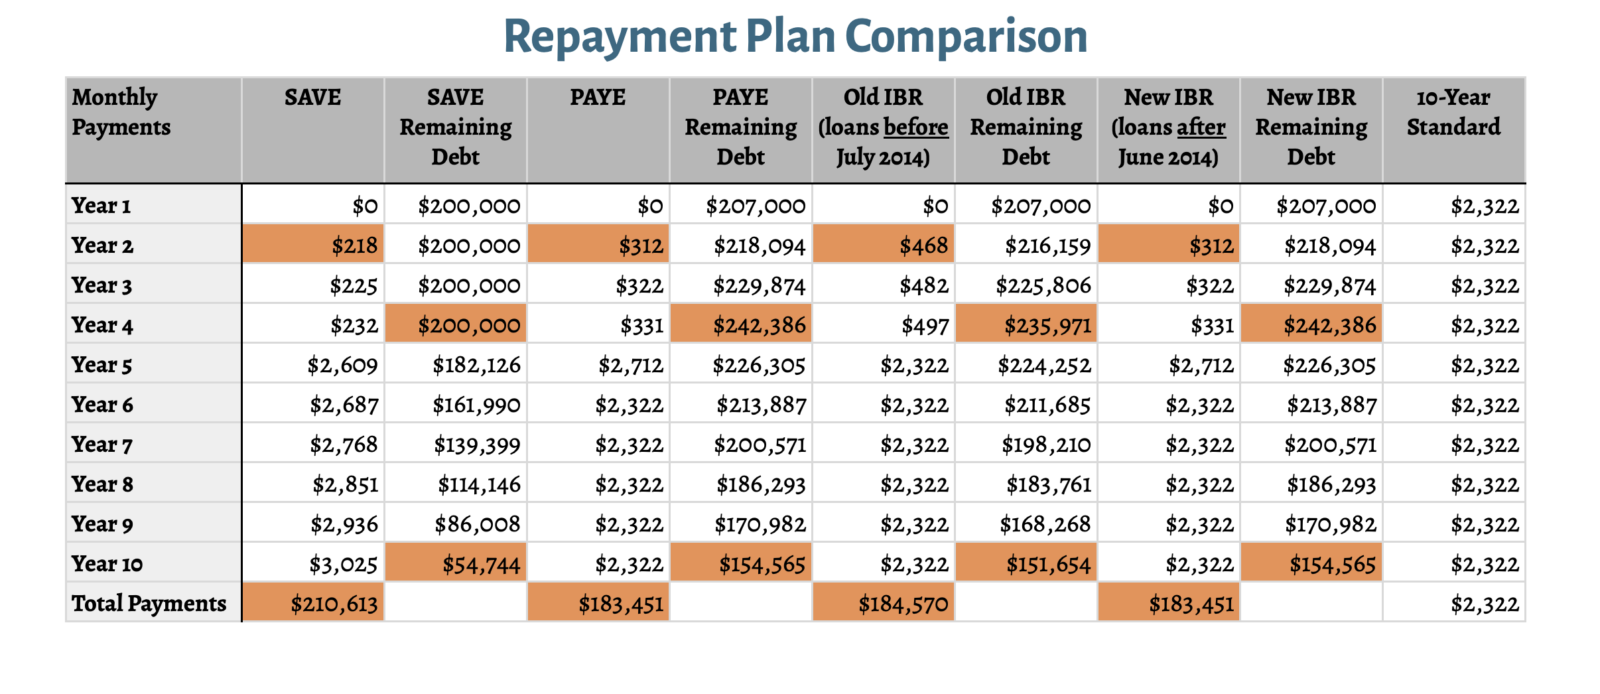 Comparison of differnet student loan repayments